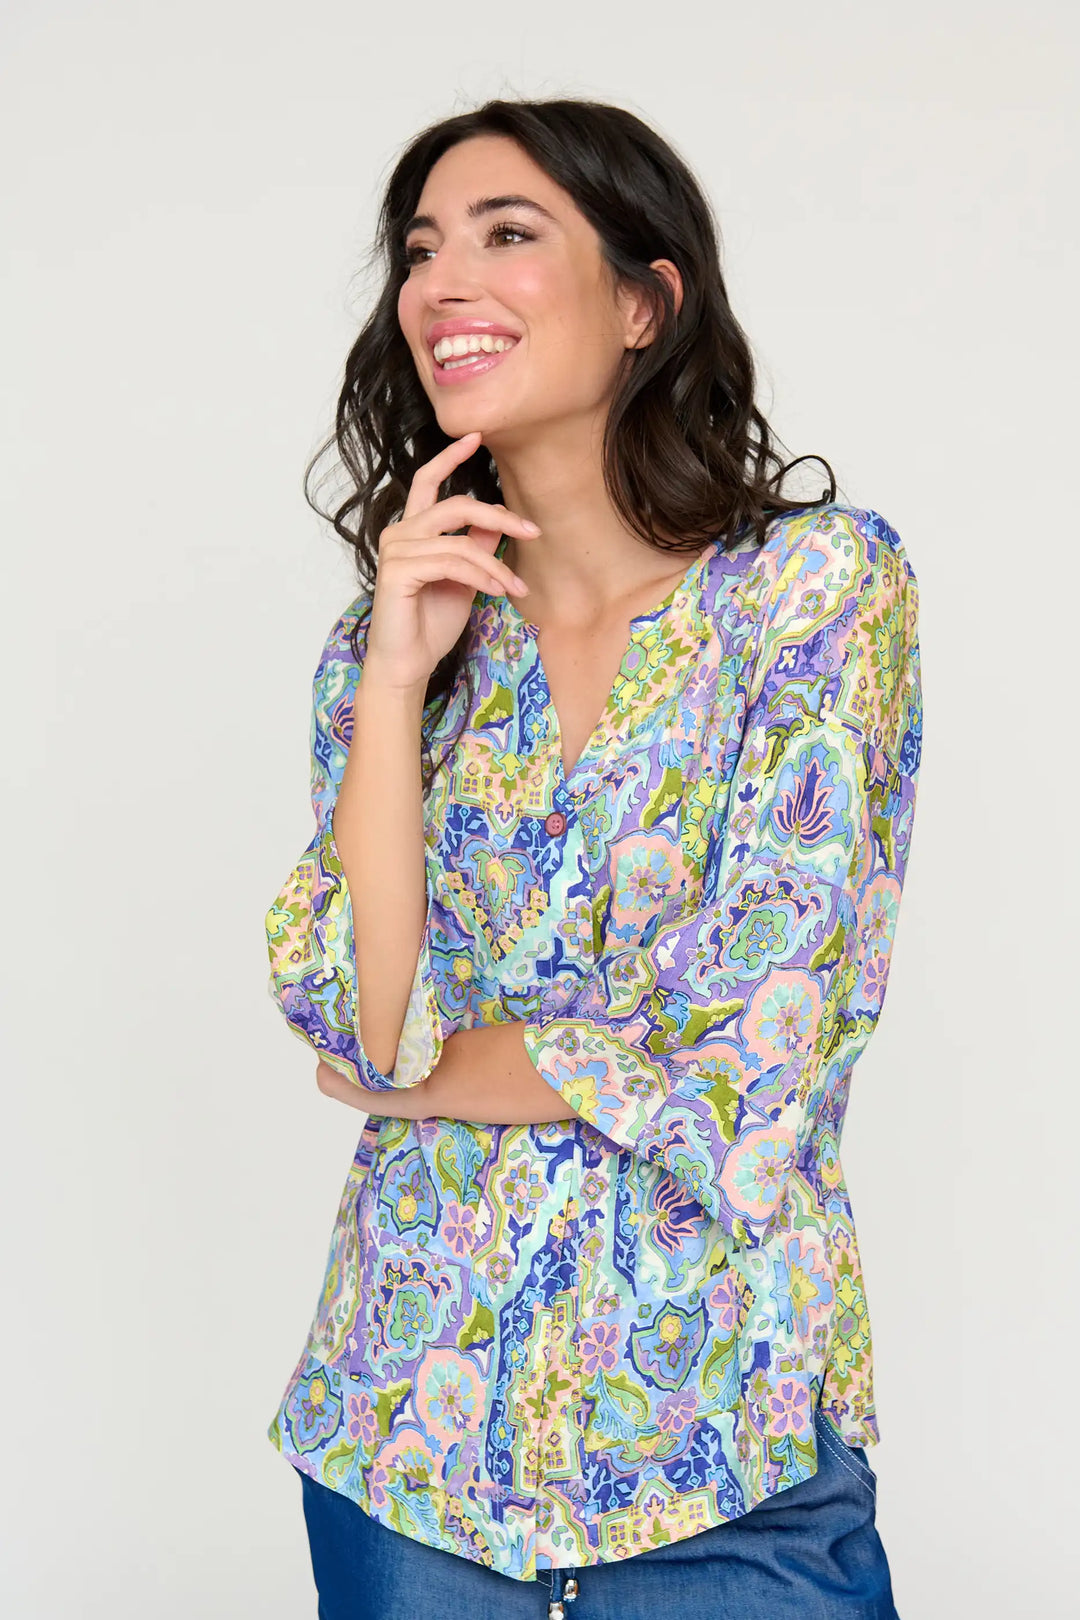 Joyful model wearing the 'Alicia' style blouse with a pastel paisley and floral print, long sleeves, and V-neck, paired with blue denim jeans.